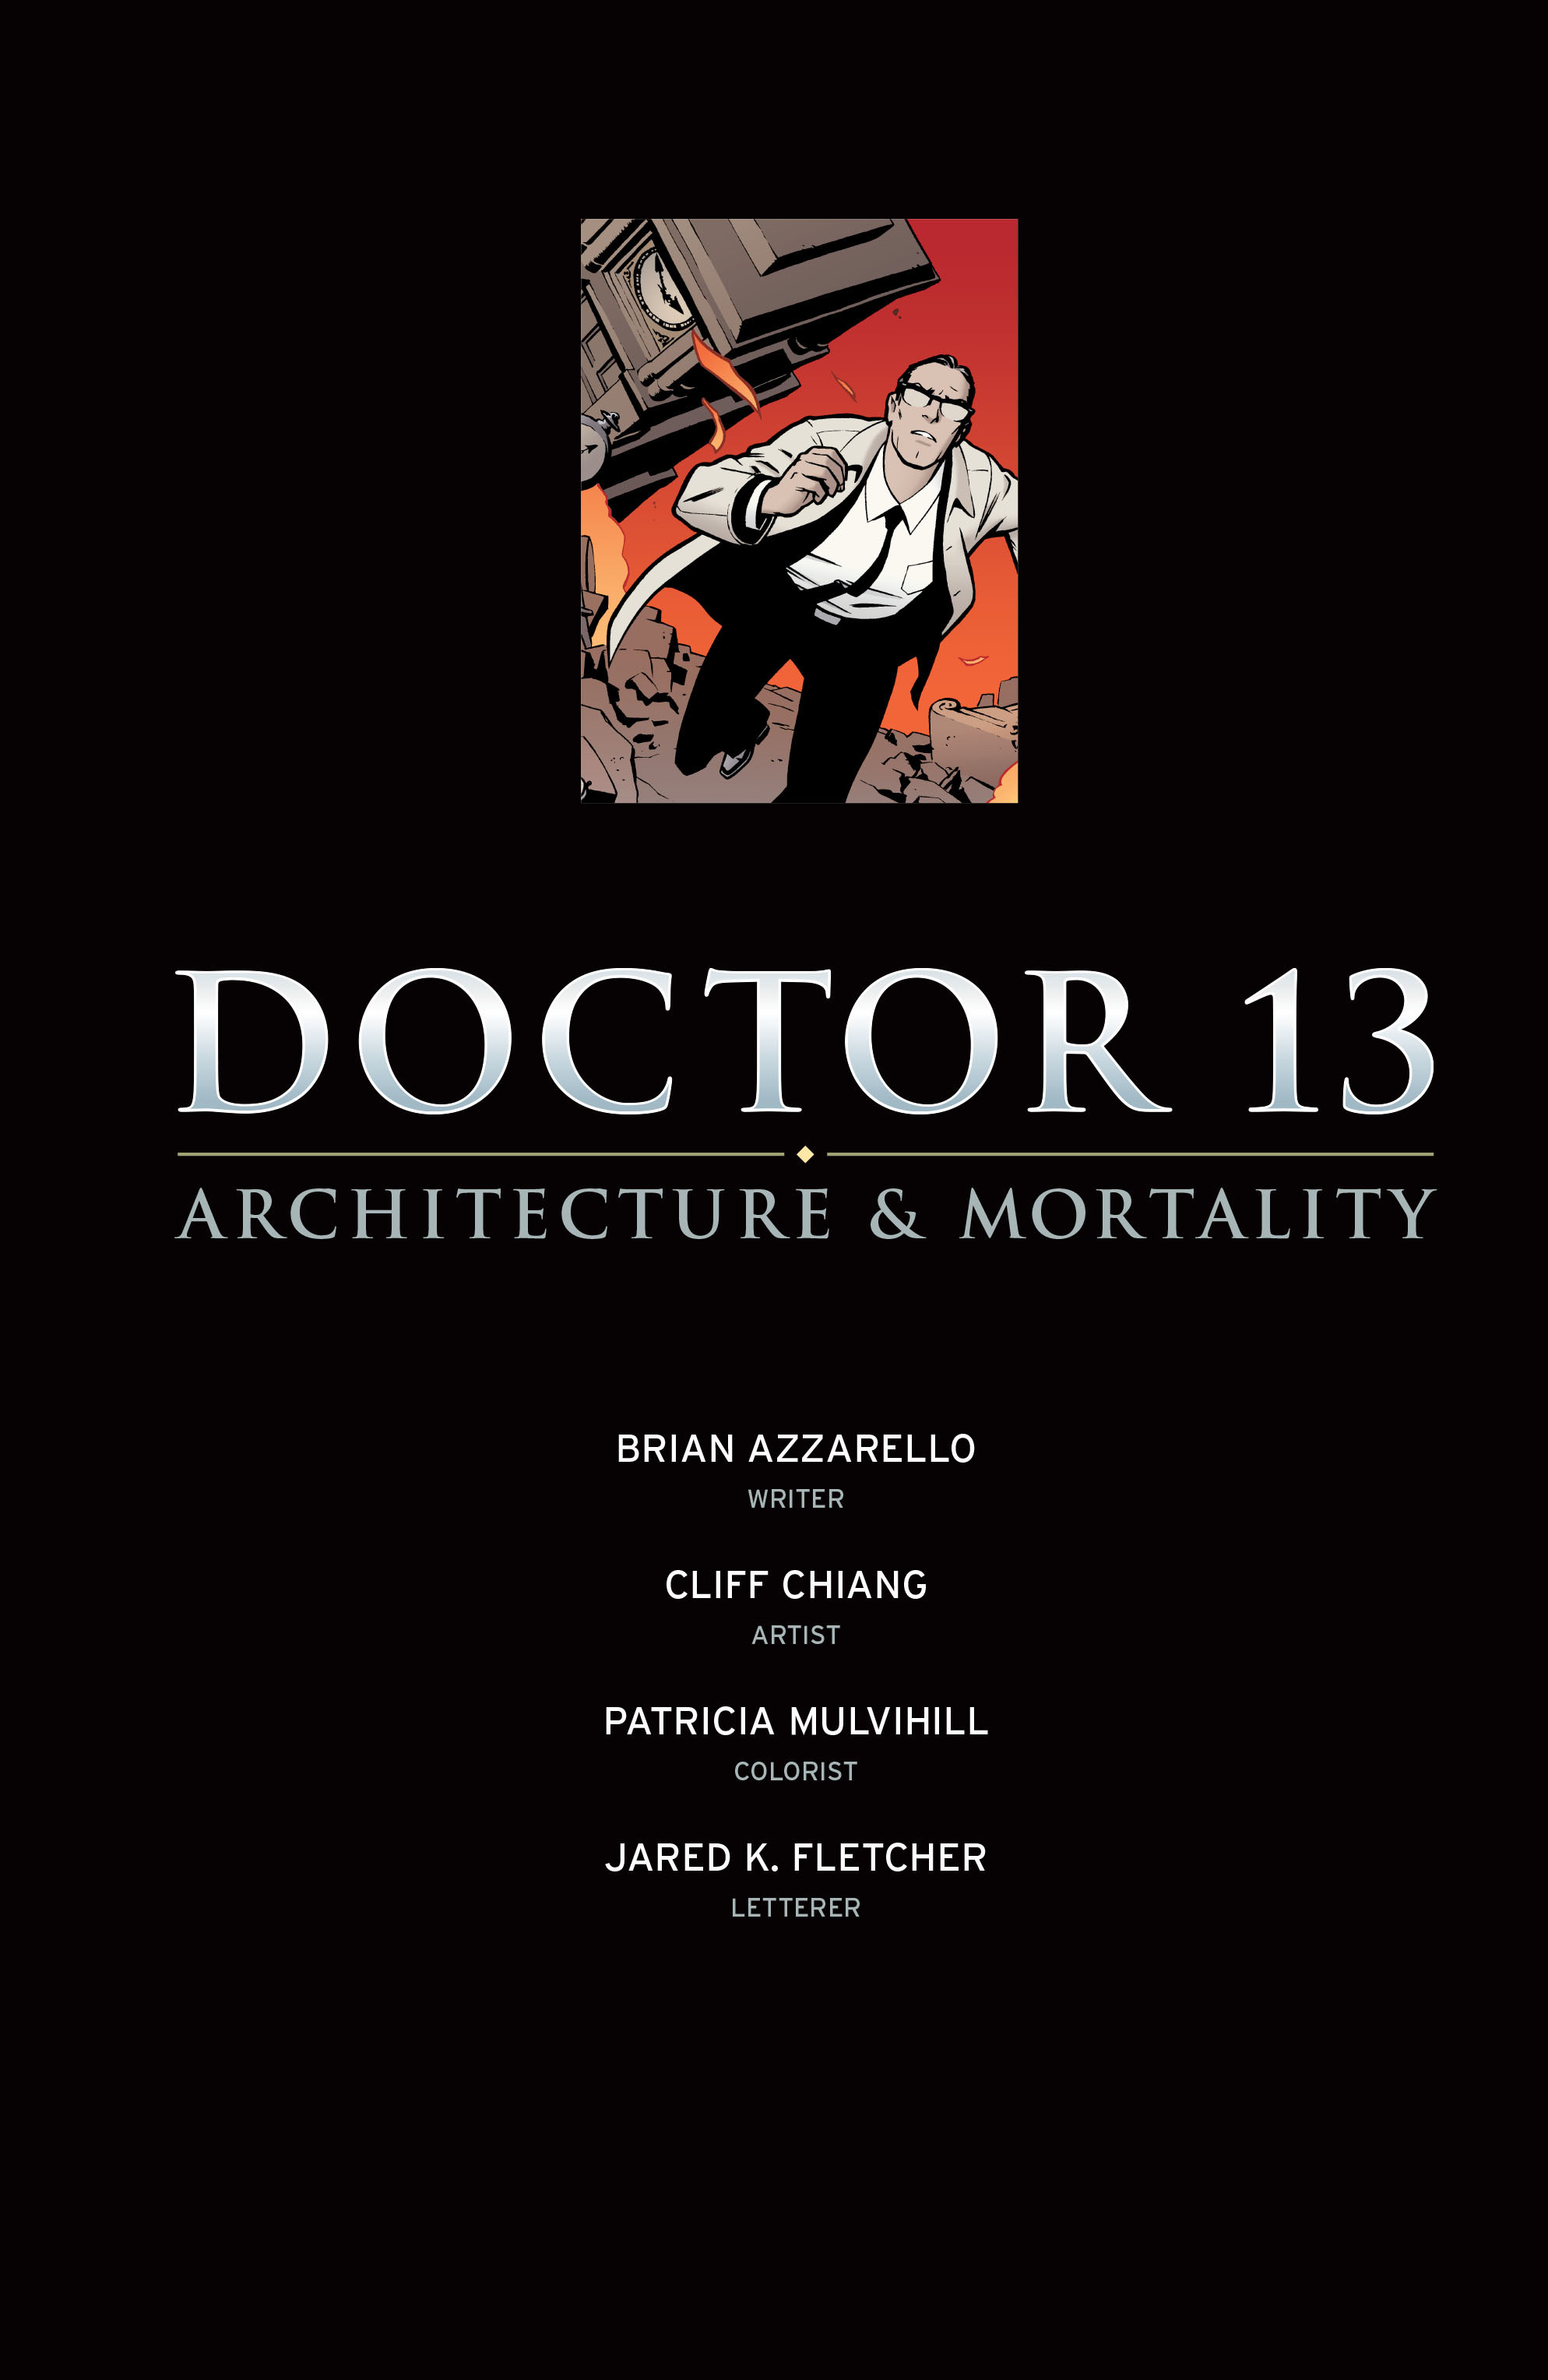 Read online Doctor 13: Architecture & Mortality comic -  Issue # Full - 4